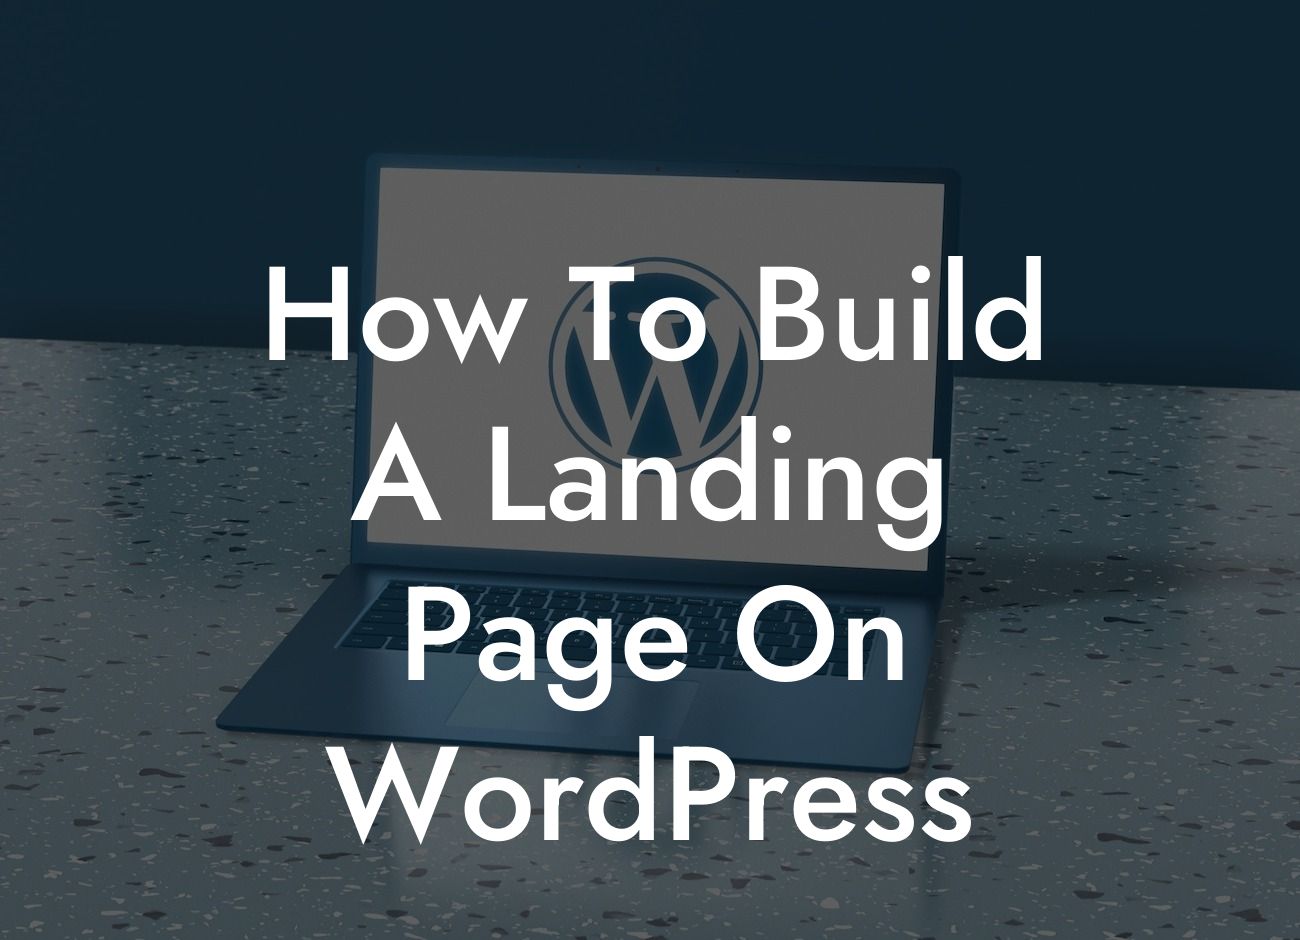 How To Build A Landing Page On WordPress